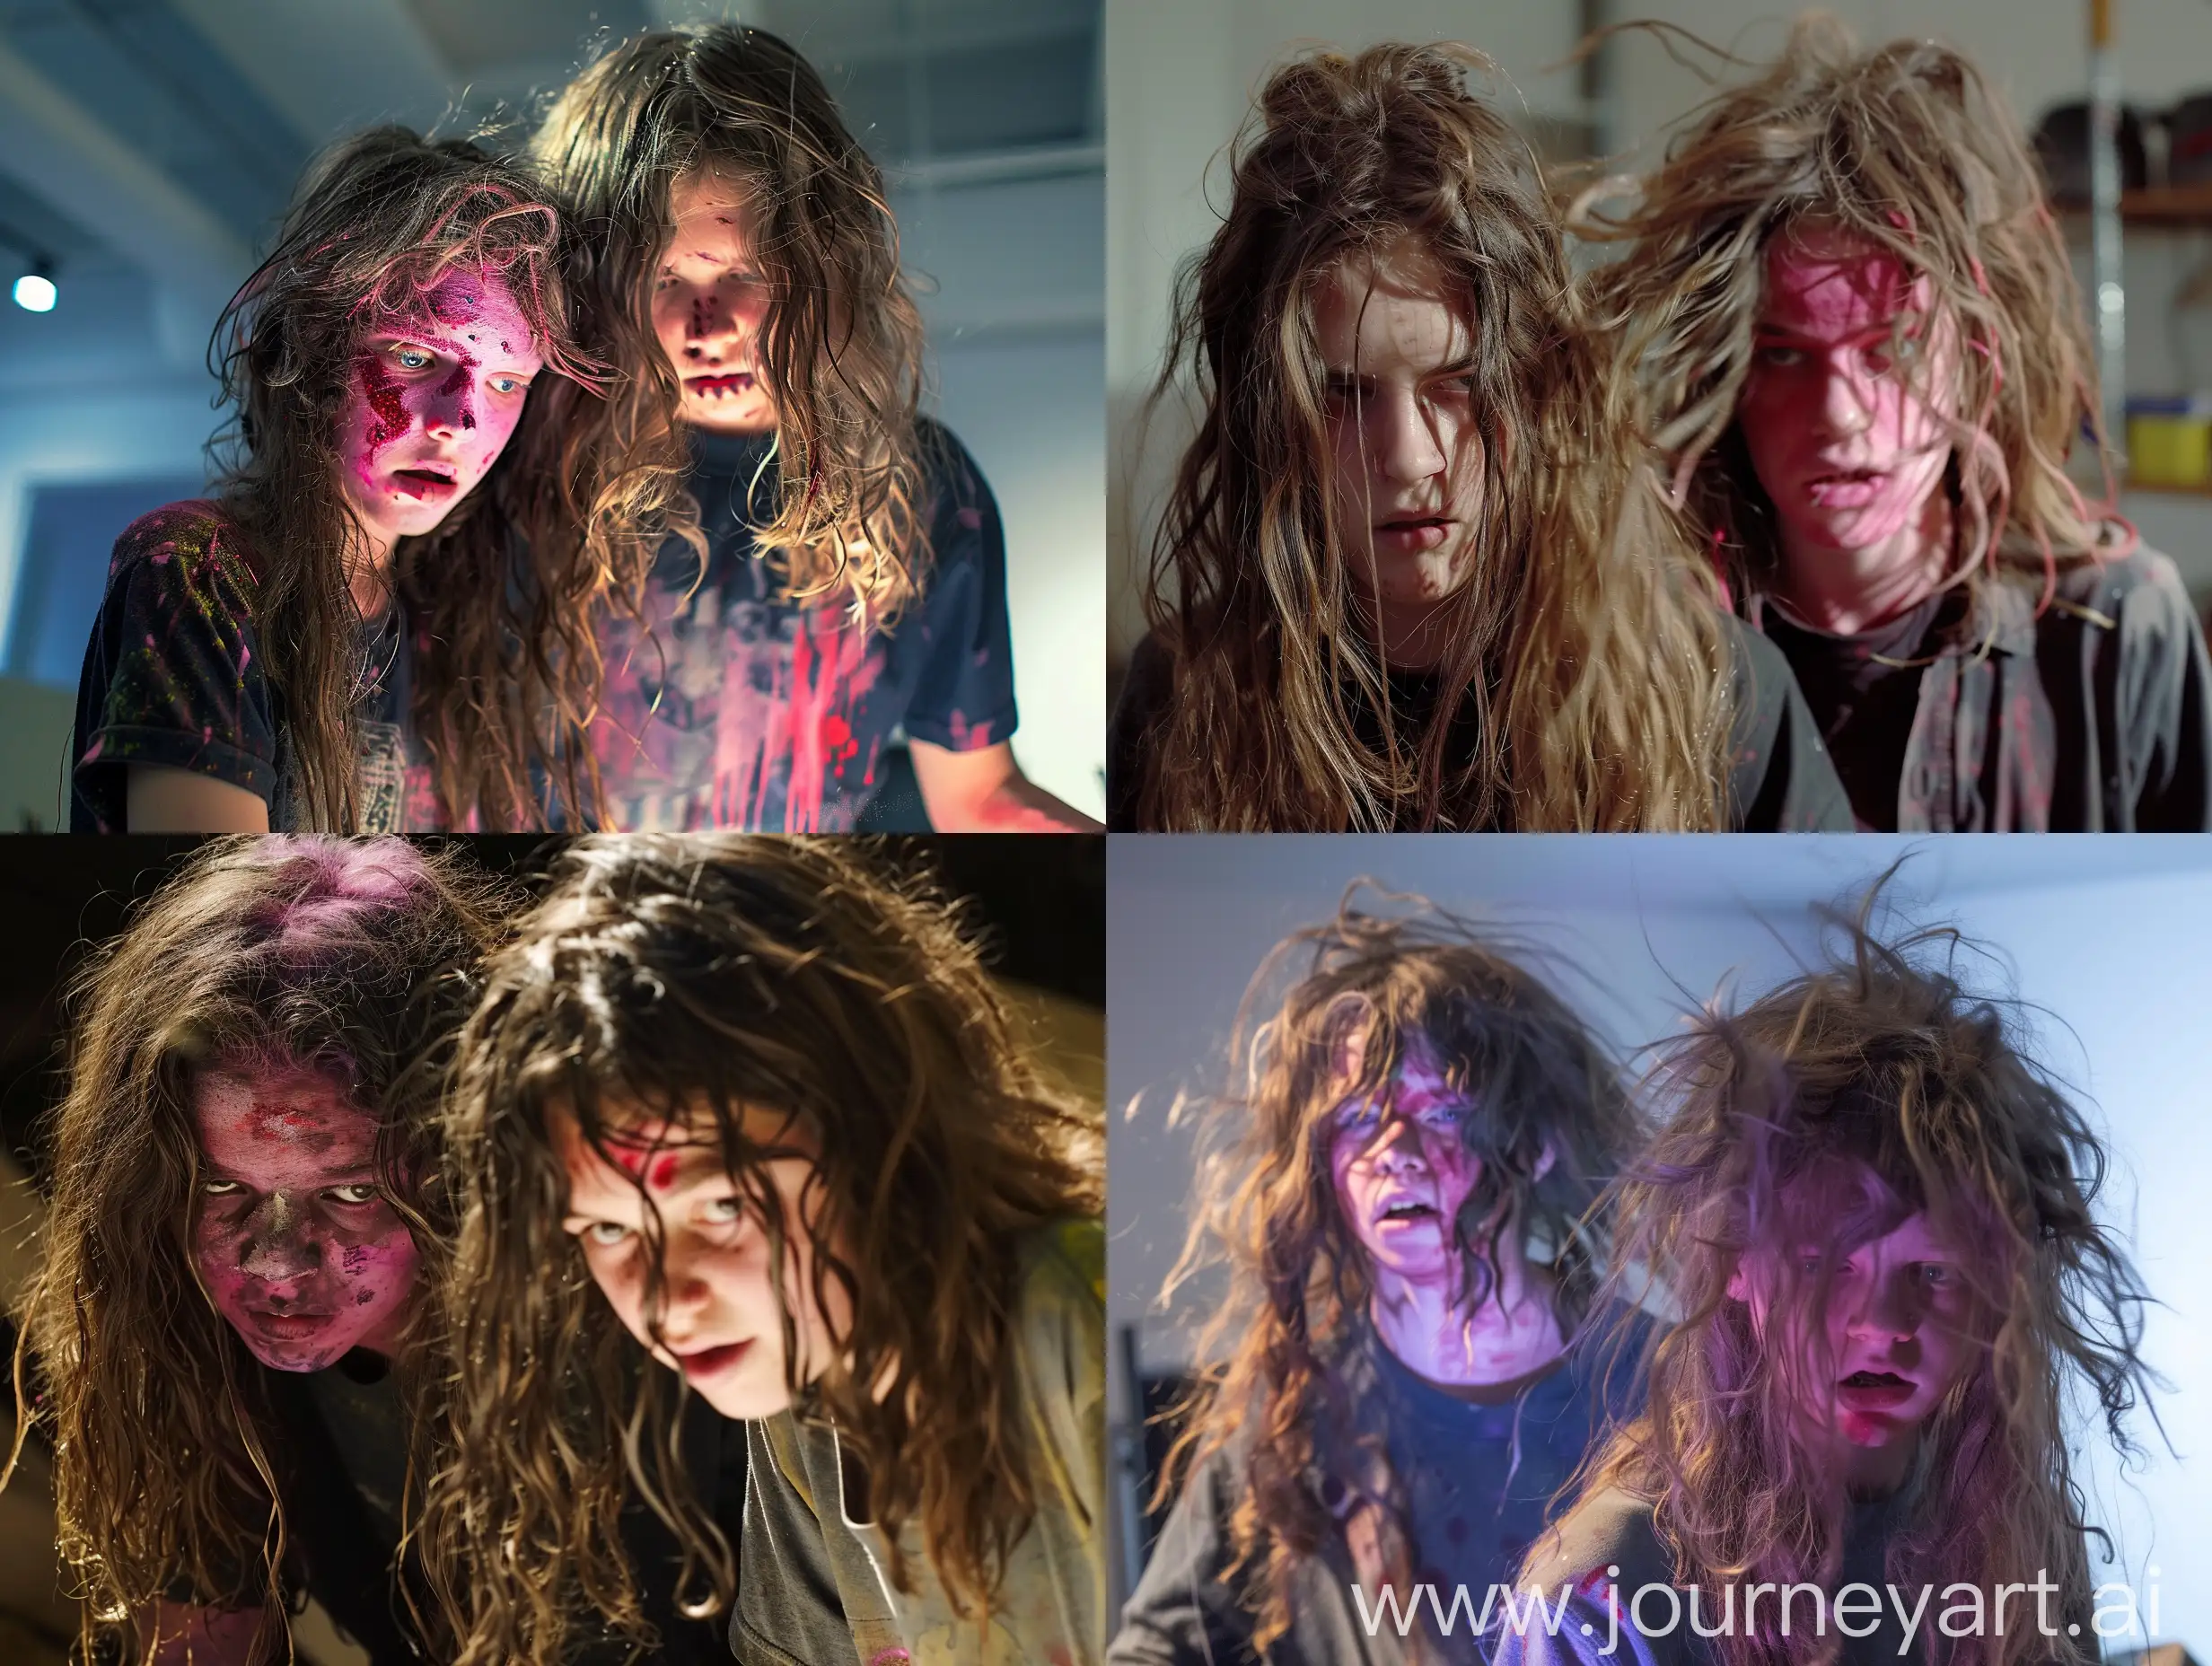 Creative-Collaboration-Young-Artists-with-Tousled-Hair-and-Vibrant-Expressions